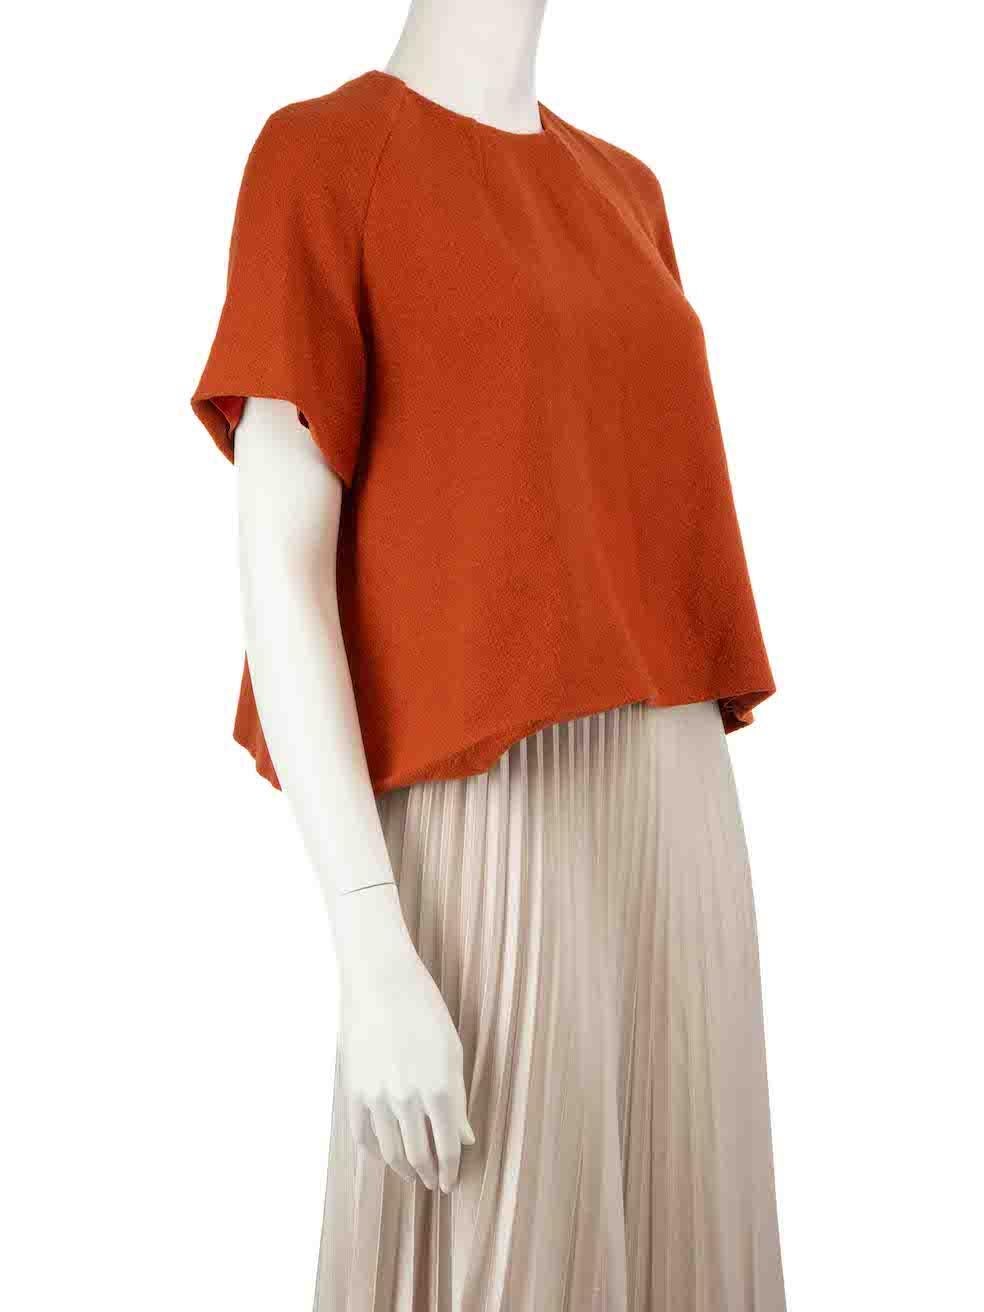 CONDITION is Never worn. No visible wear to top is evident on this new Emilia Wickstead designer resale item.
 
 
 
 Details
 
 
 Orange
 
 Wool
 
 Top
 
 Round neck
 
 Short sleeves
 
 Back hook fastening
 
 
 
 
 
 Made in Italy
 
 
 
